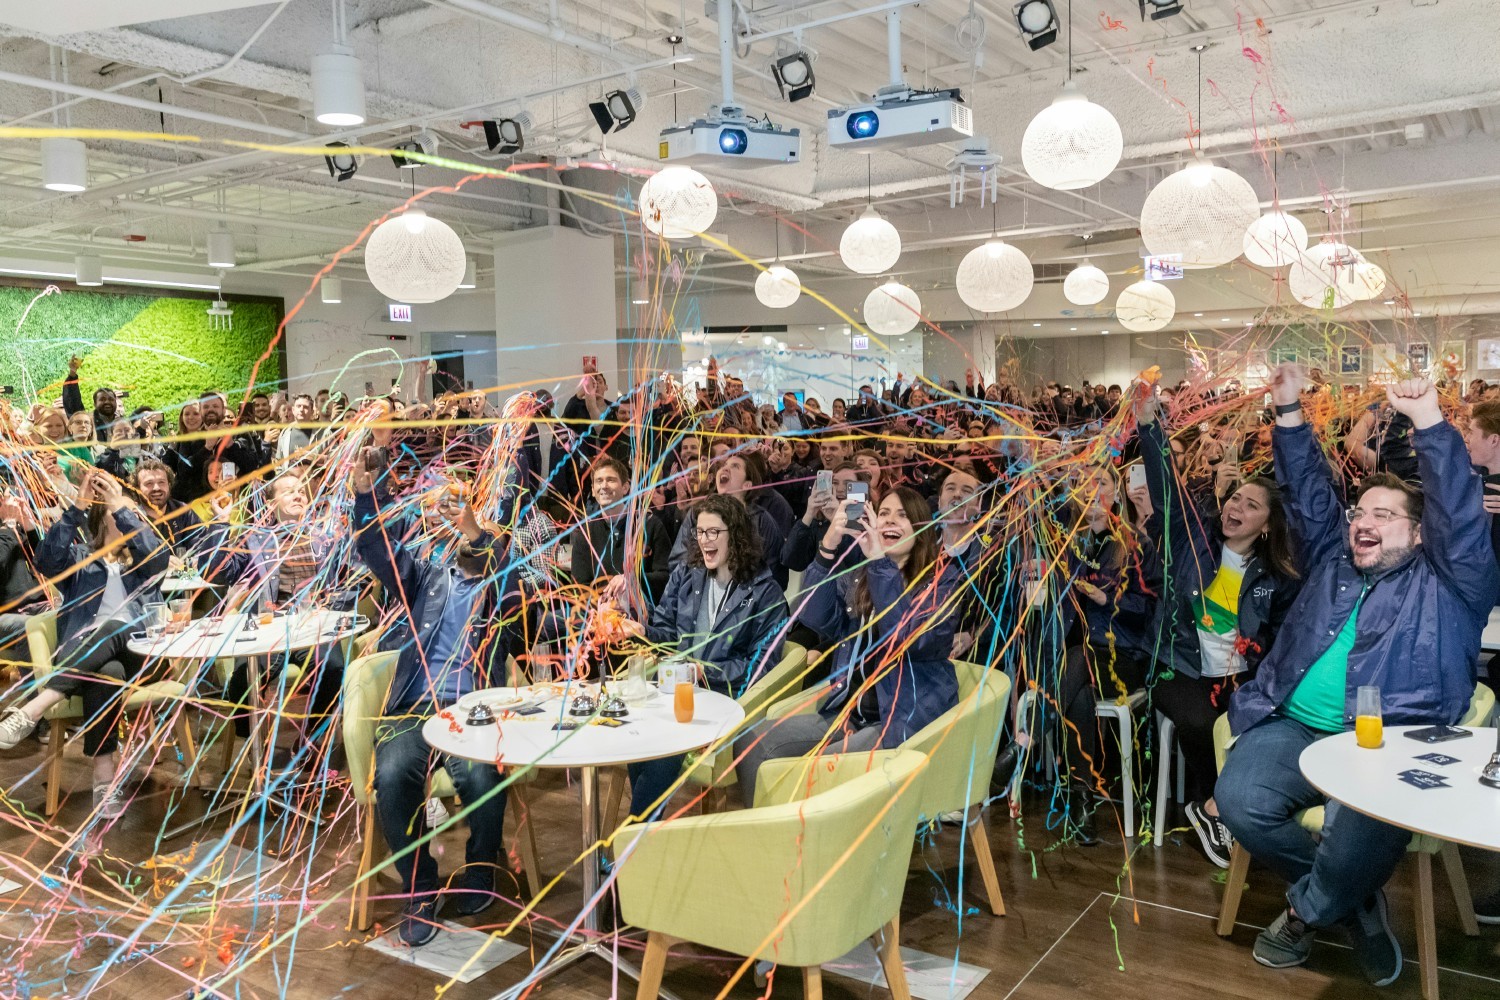 Celebrating Sprout Social's IPO at our Chicago HQ.